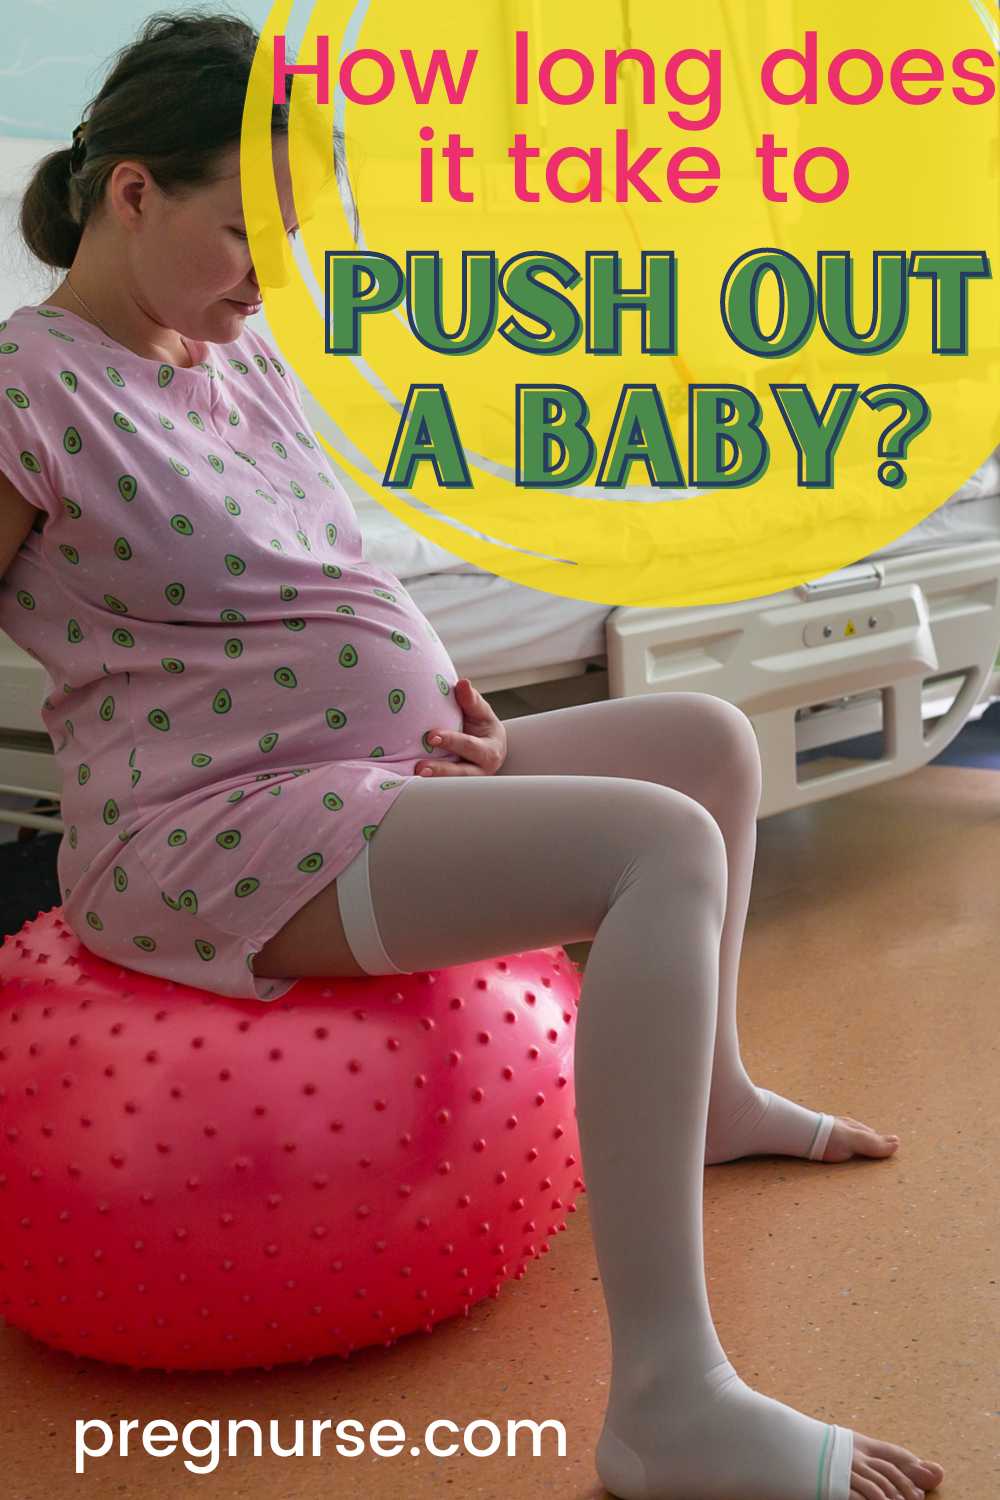 What is the average pushing time of a first baby?